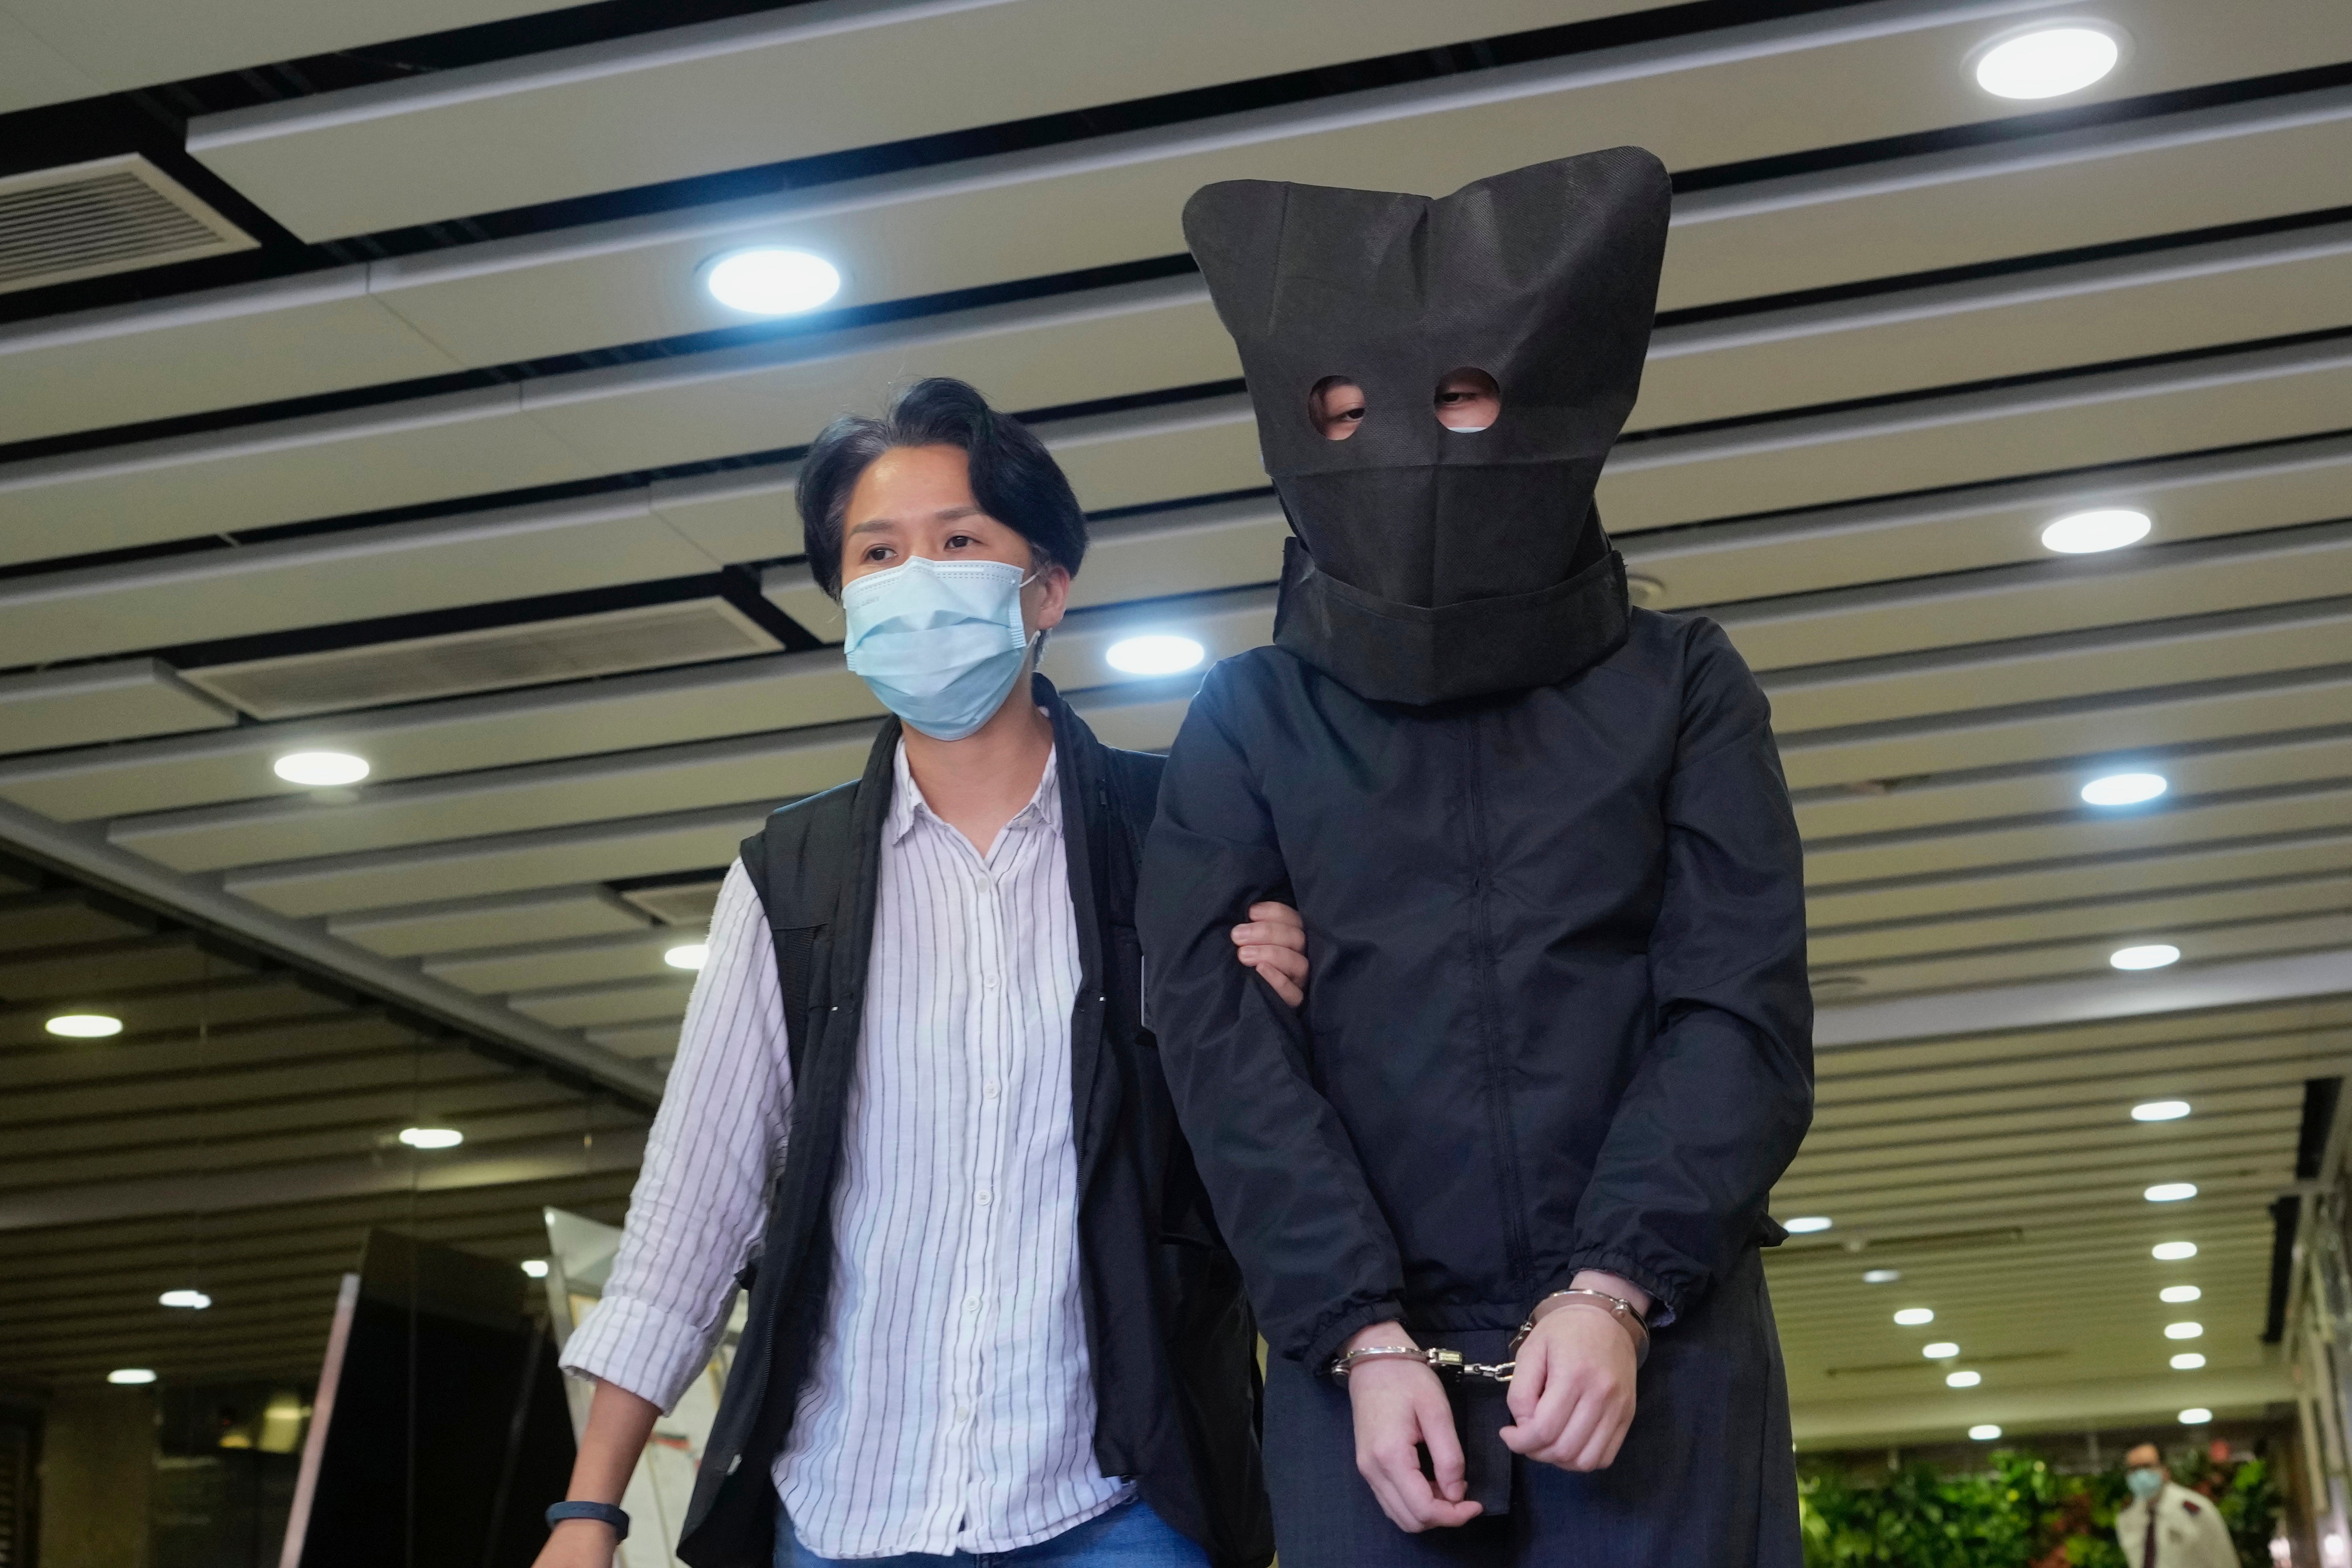 A hooded suspect is accompanied by a police officer in Hong Kong in the latest arrests made amid a crackdown on dissent in the city